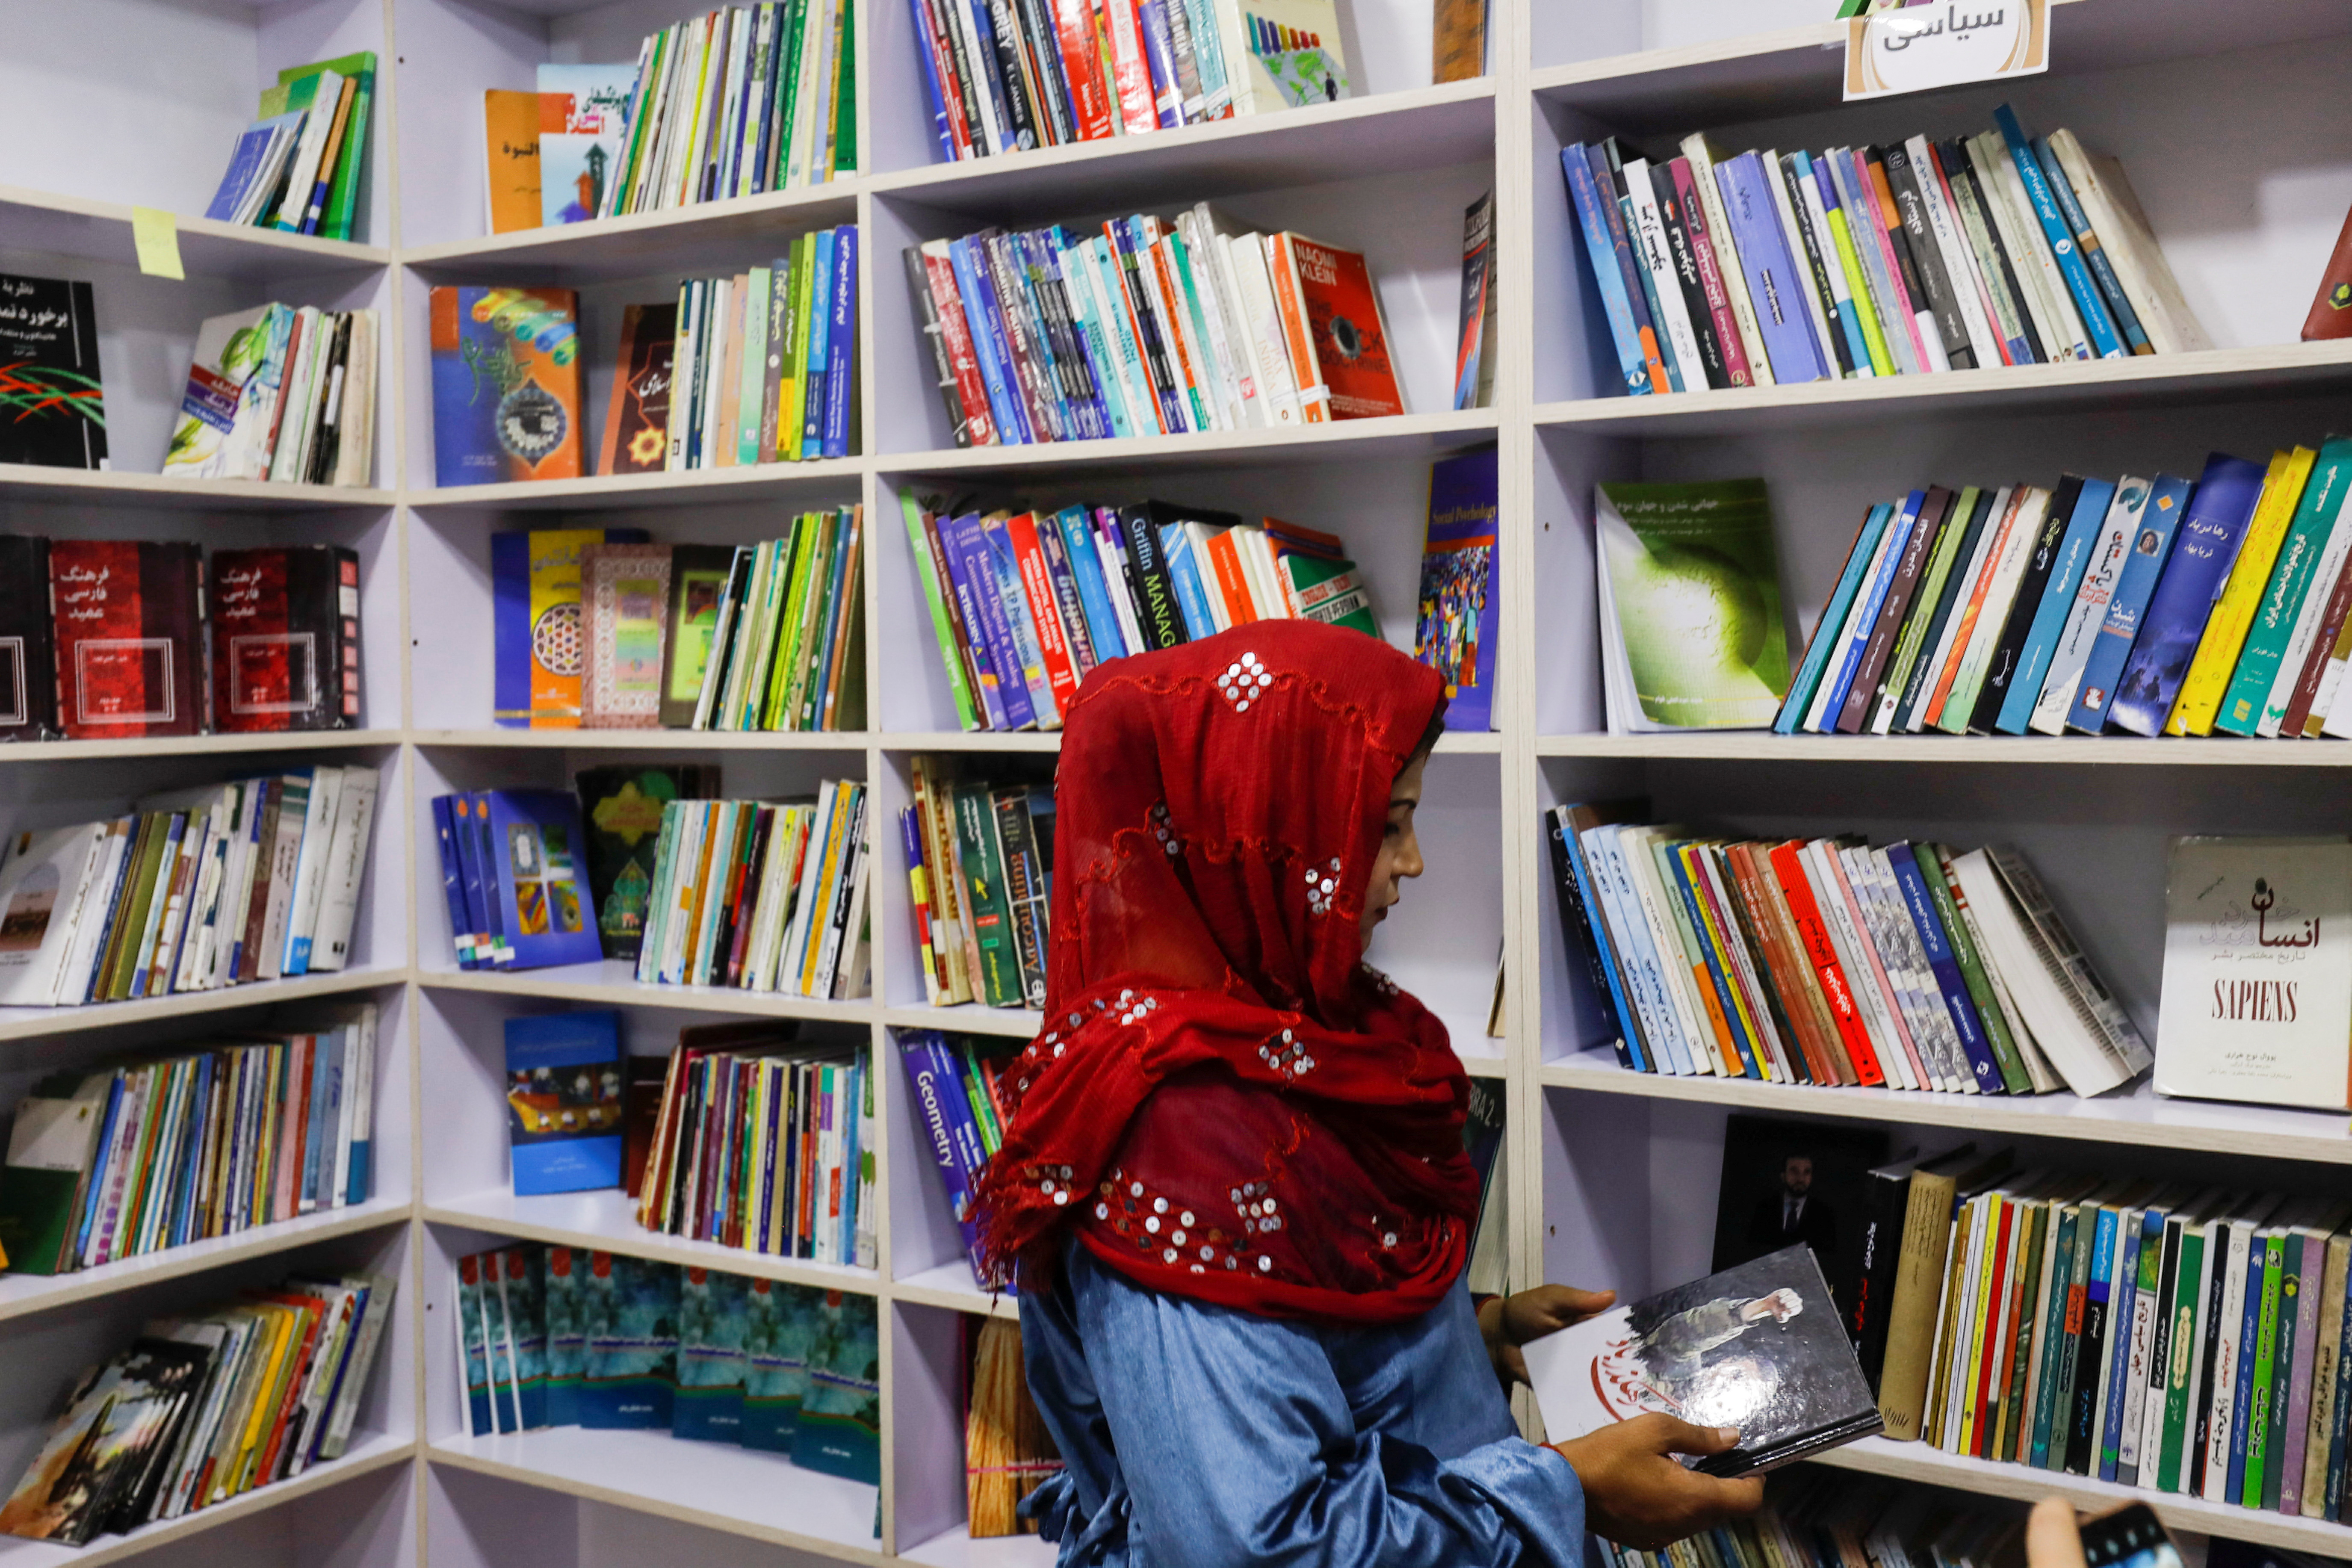 Afghan woman attends the inauguration of women's library in Kabul